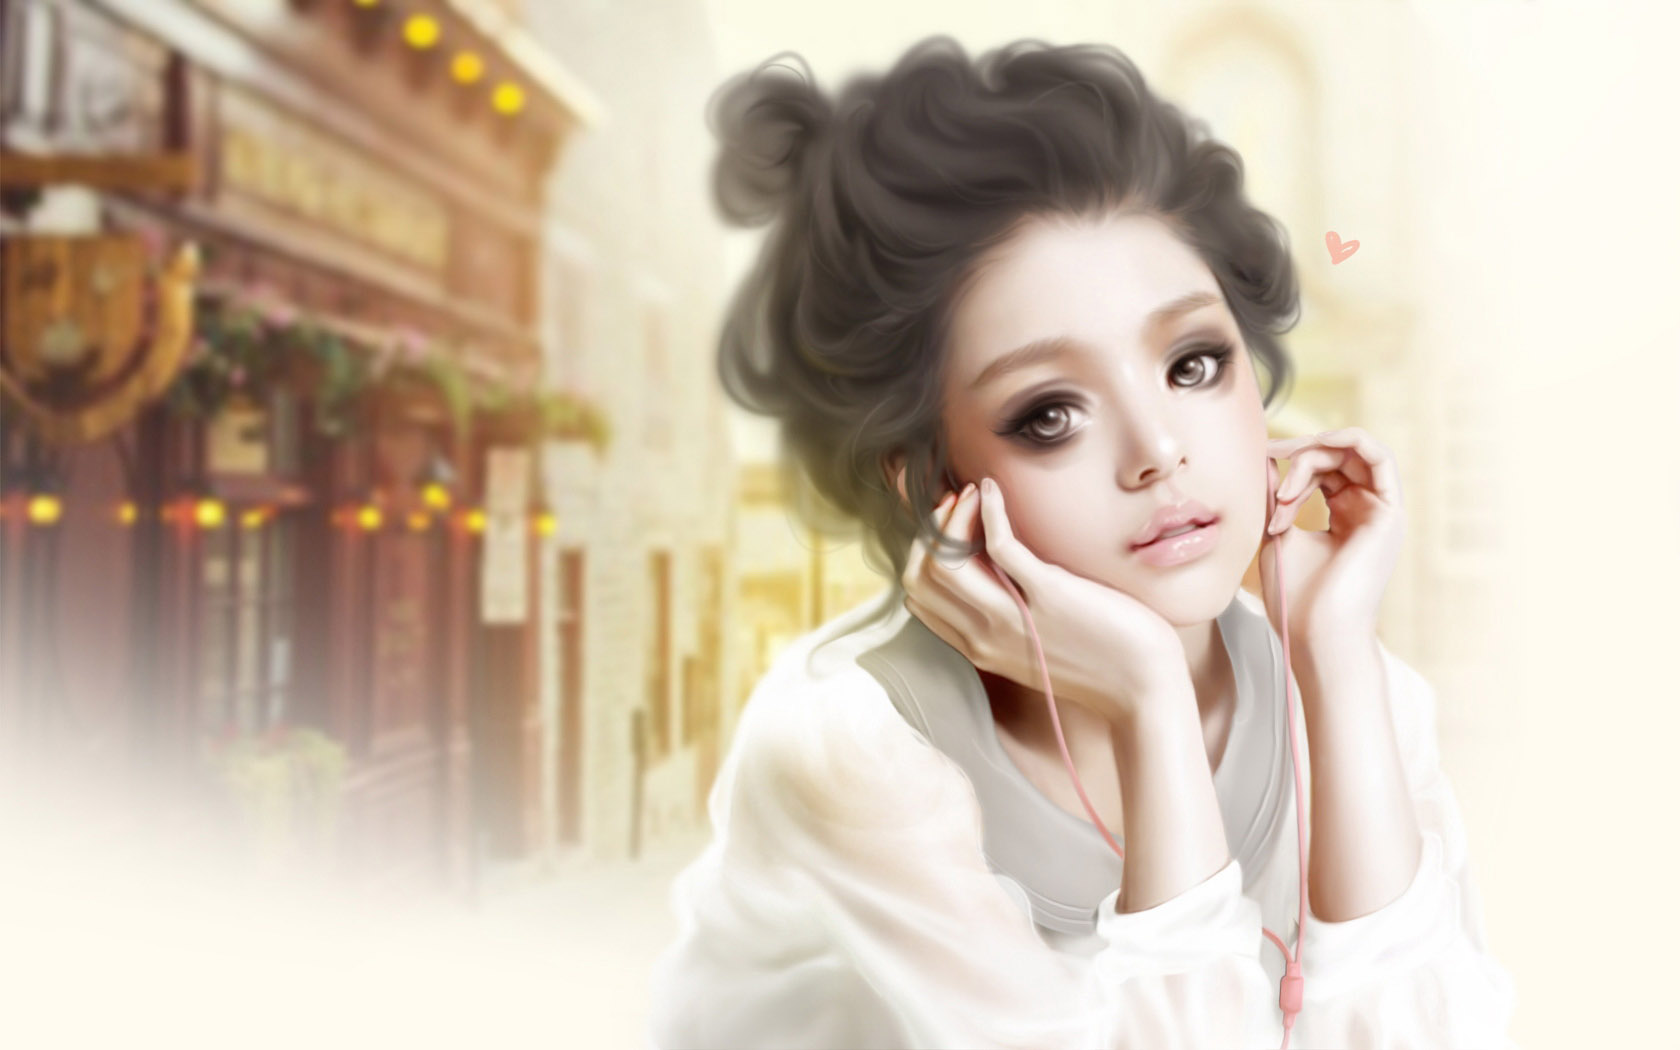 Desktop pictures of beautiful hand-painted characters and beauties